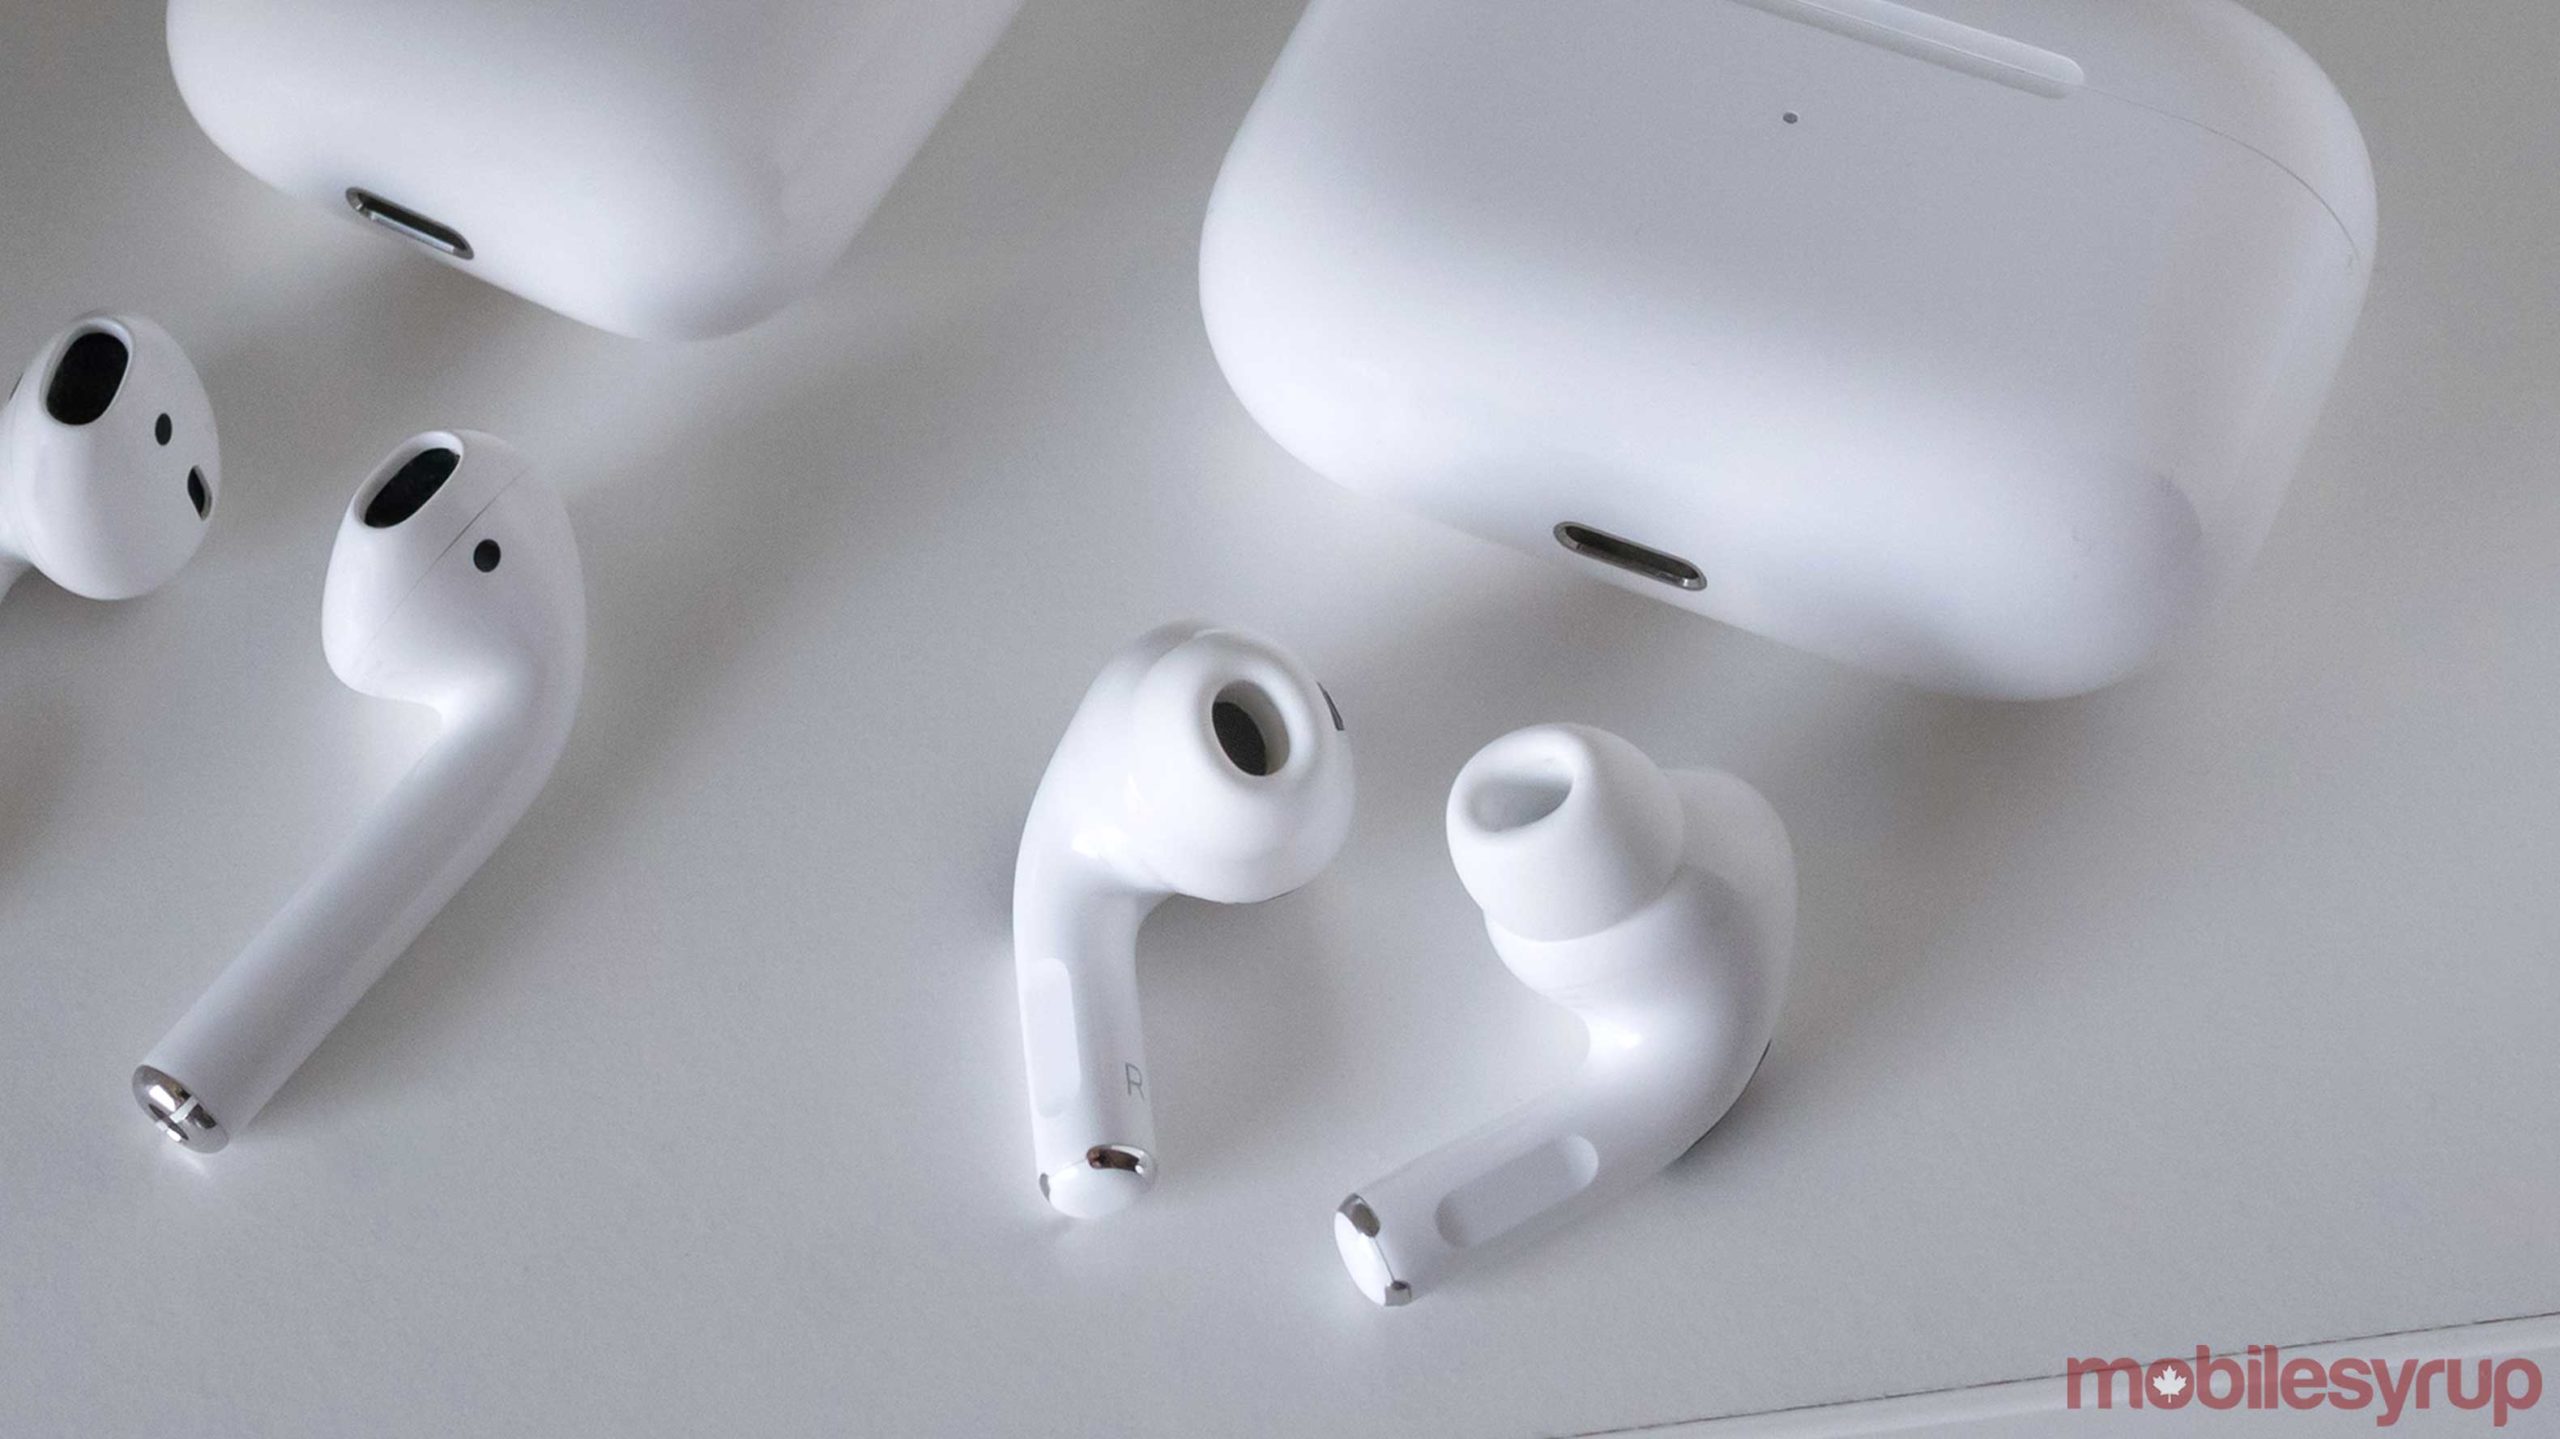 Rogers is currently offering 20 percent off on Apple AirPods Pro